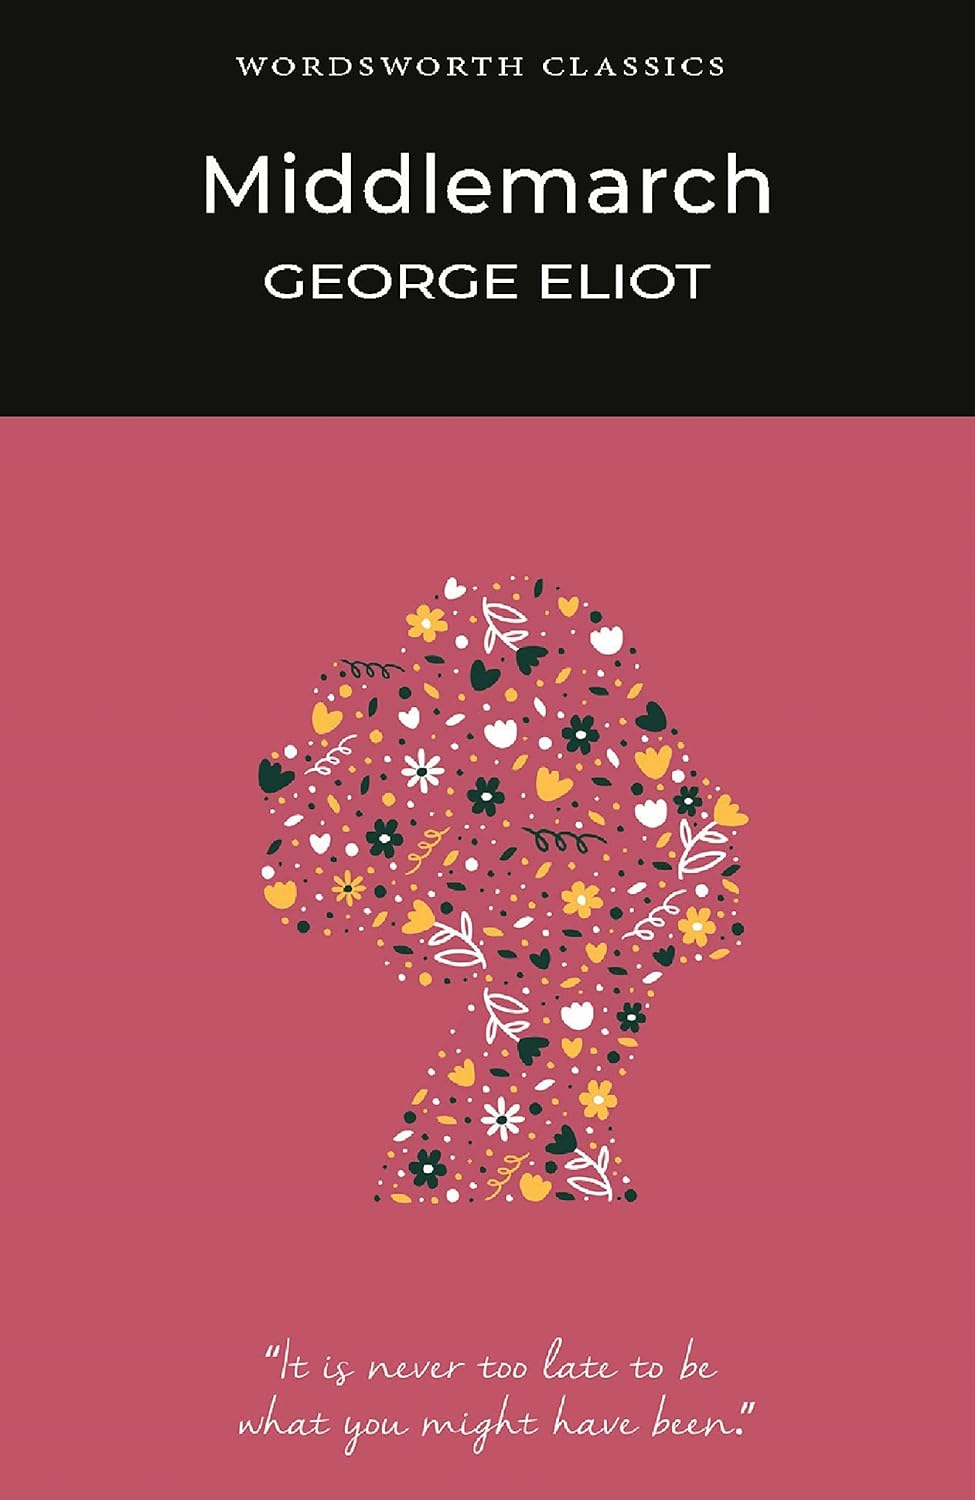 Sách Ngoại Văn - Middlemarch (Wordsworth Classics) Paperback by George Eliot (Author)